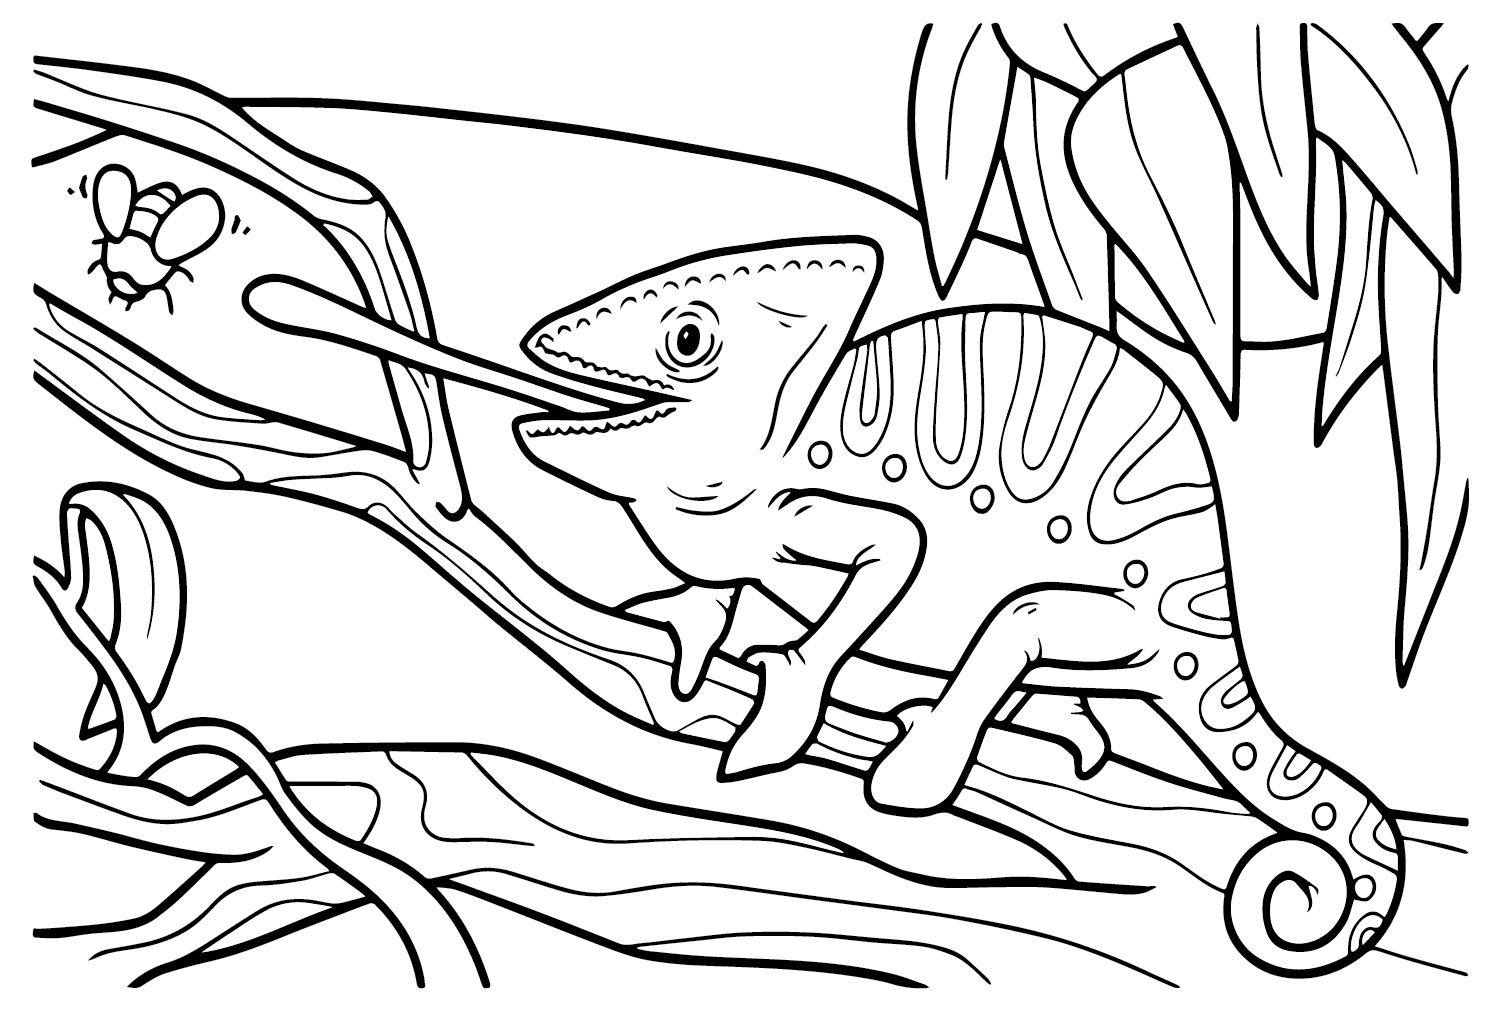 Chameleon Coloring Page from Chameleon